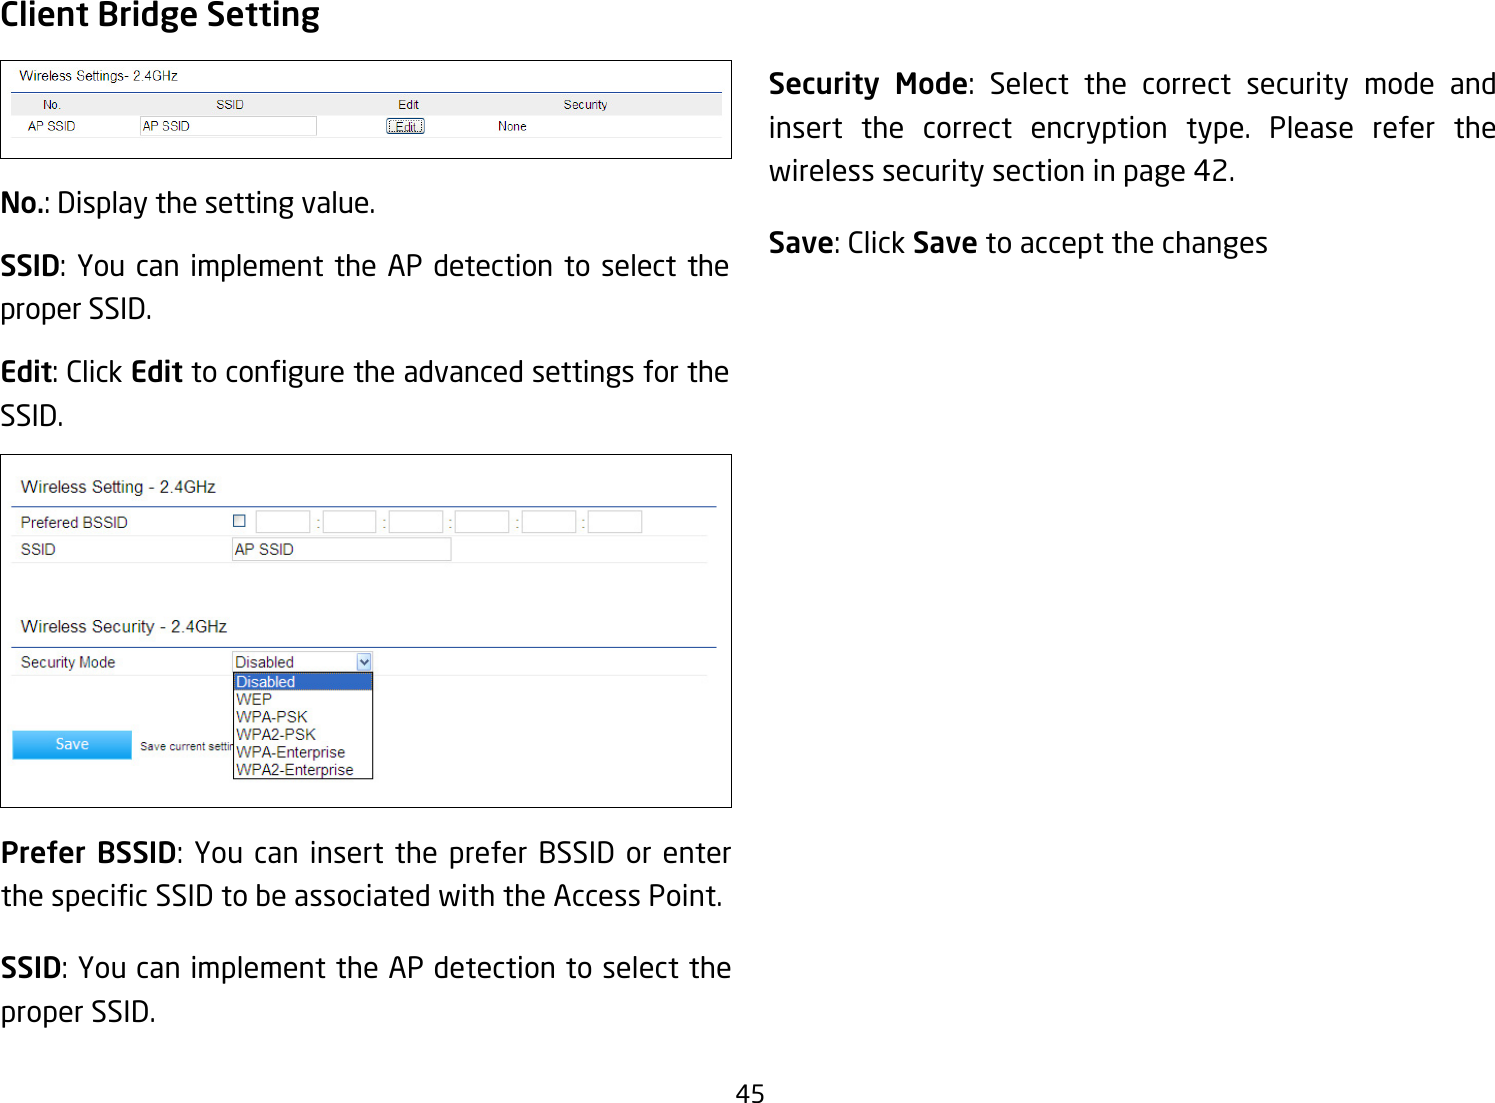 45Client Bridge SettingNo.: Display the setting value.SSID: You can implement the AP detection to select the proper SSID.Edit: Click EdittoconguretheadvancedsettingsfortheSSID.Prefer BSSID: You can insert the prefer BSSID or enter thespecicSSIDtobeassociatedwiththeAccessPoint.SSID: You can implement the AP detection to select the proper SSID.Security Mode: Select the correct security mode and insert the correct encryption type. Please refer the wireless security section in page 42.Save: Click Save to accept the changes